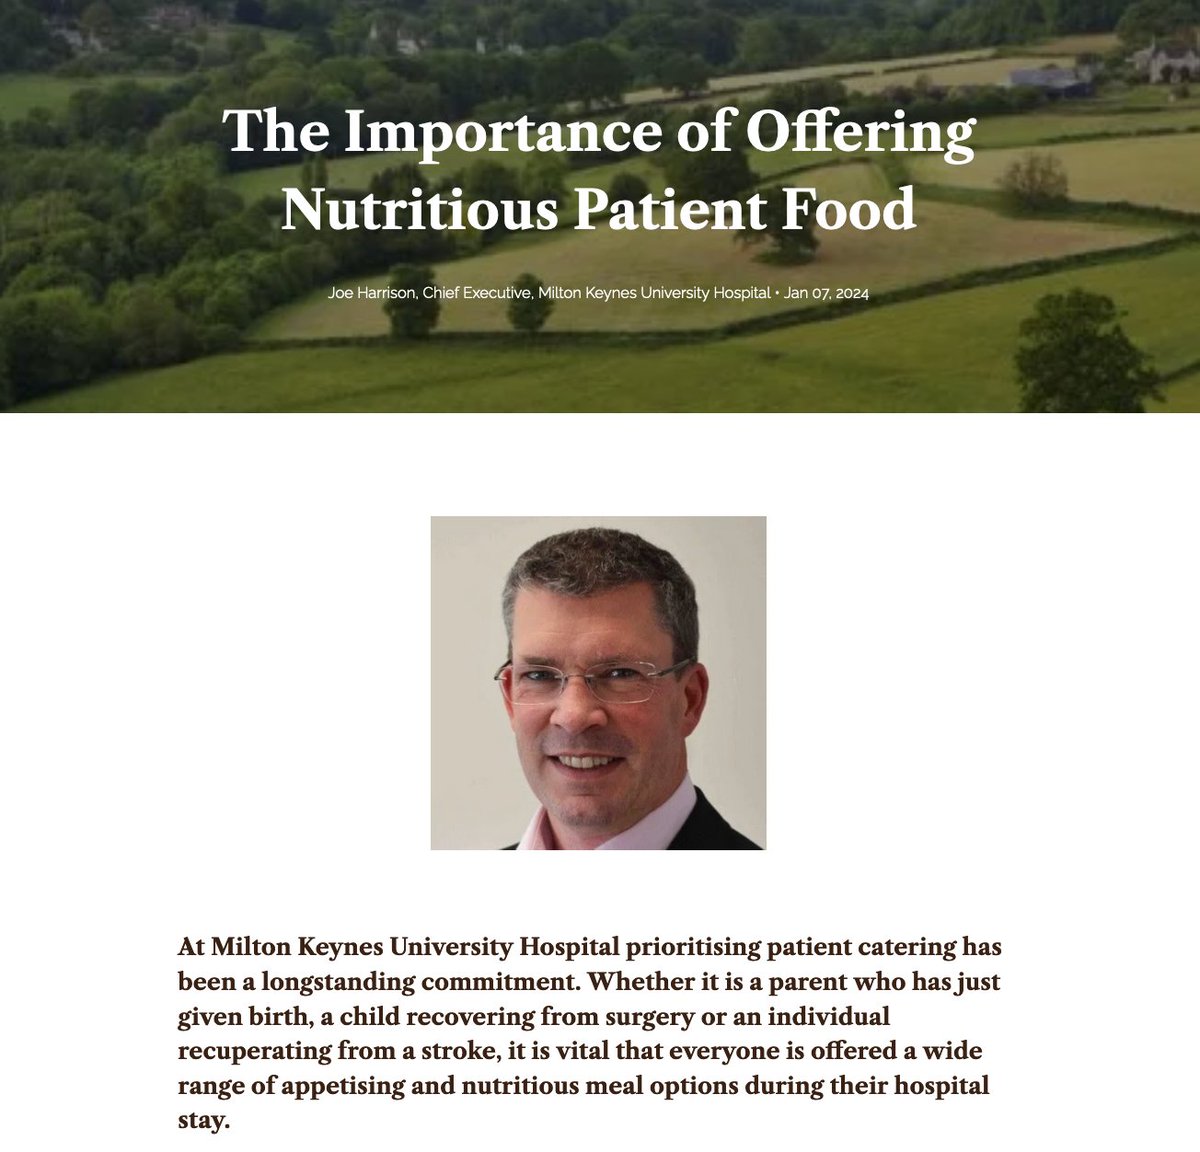 The Importance of Offering Nutritious Patient Food. Joe Harrison, Chief Executive, Milton Keynes University Hospital - writing for Love British Food. We want to inspire ALL CEOs to have food on their agenda, this superb piece will certainly help that ⬇️ lovebritishfood.co.uk/the-importance…